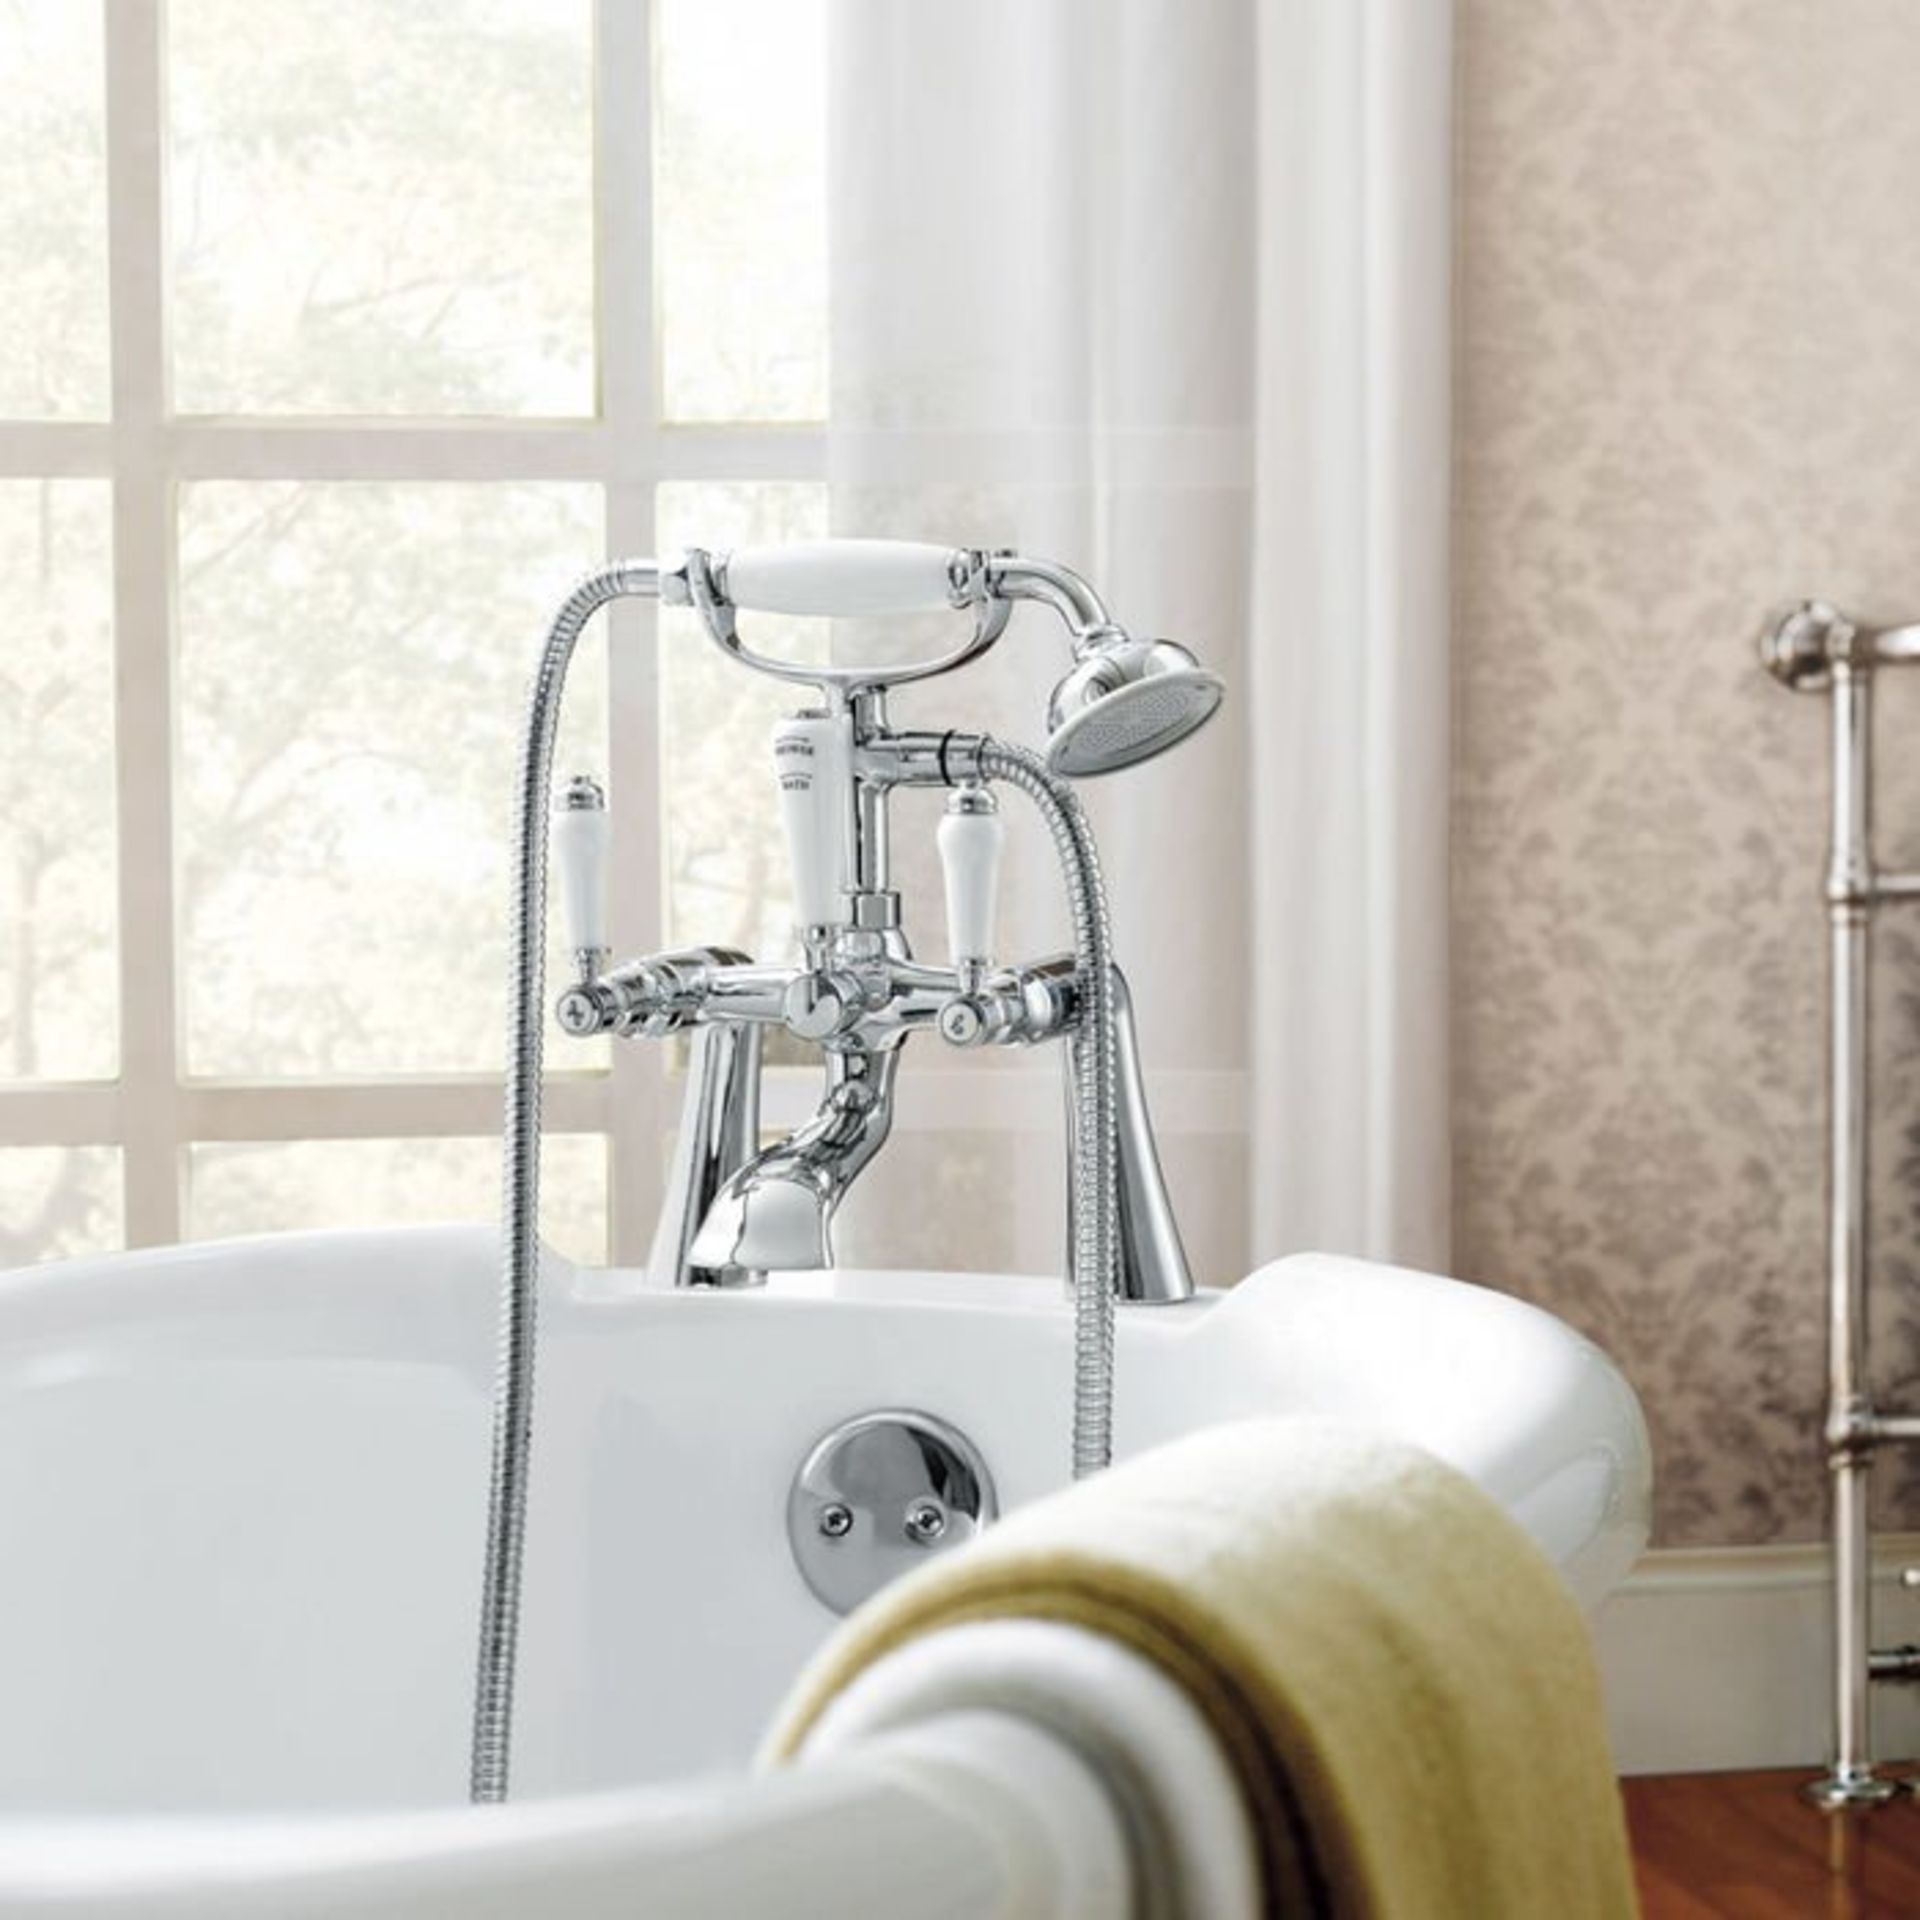 (H28) Regal Chrome Traditional Bath Mixer Lever Tap with Hand Held Shower RRP £179.99 Chrome - Image 2 of 5